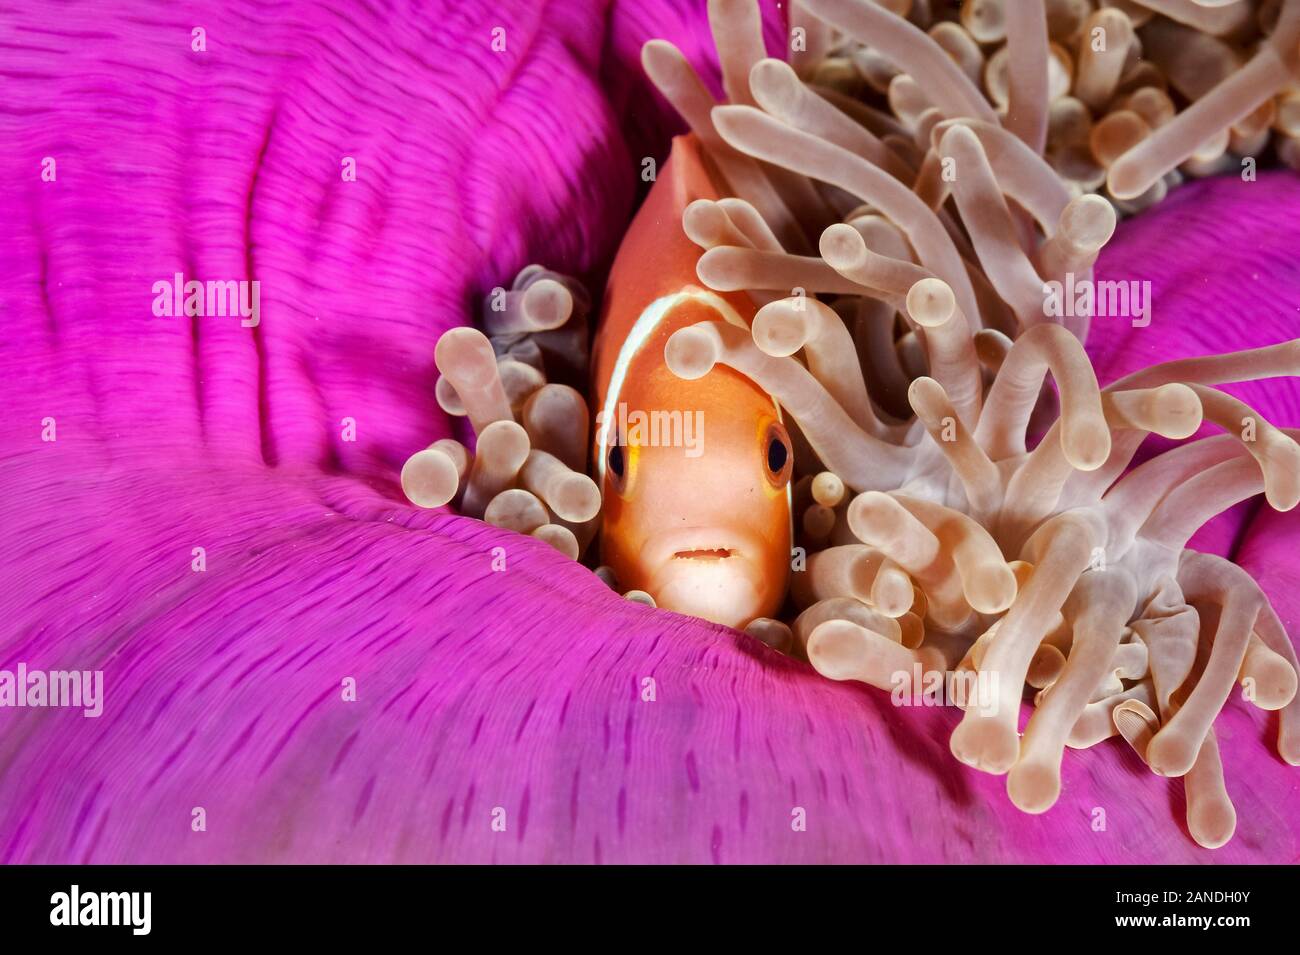 pink anemonefish, Amphiprion perideraion, in its host magnificent sea anemone, Heteractis magnifica, Maldives, Indian Ocean Stock Photo